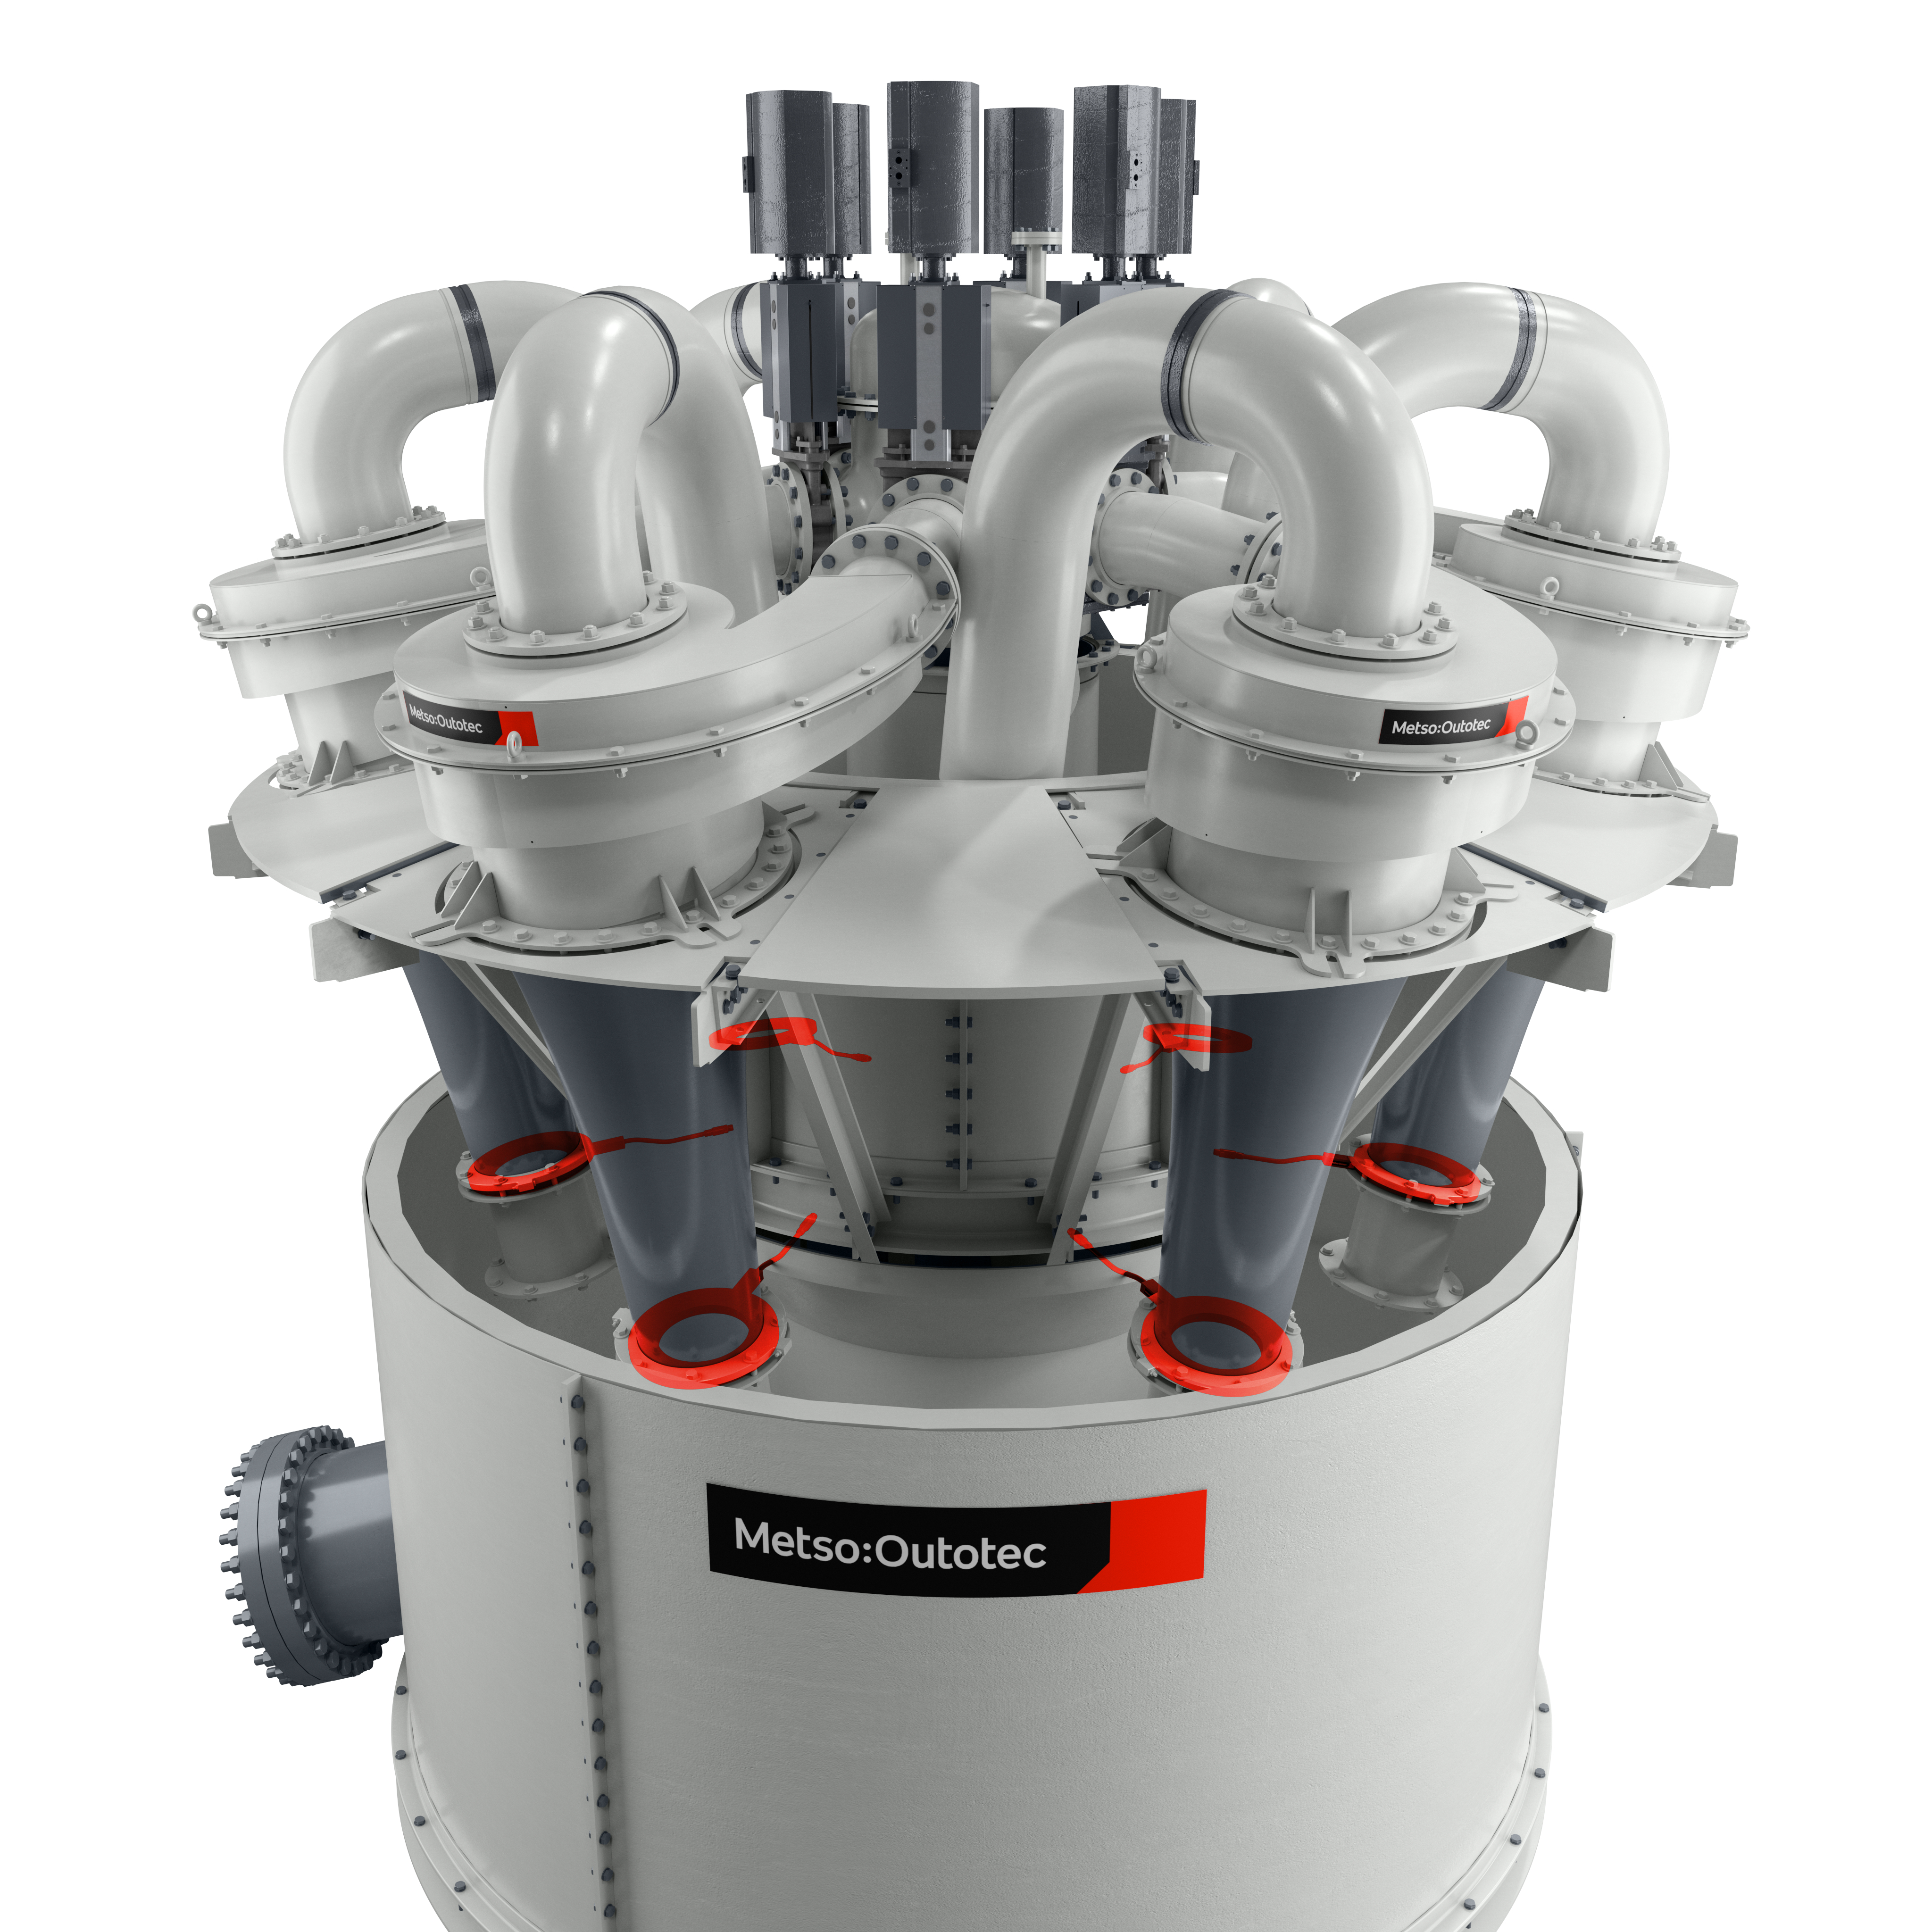 MHC™ hydrocyclone cluster with CycloneSense™ technology